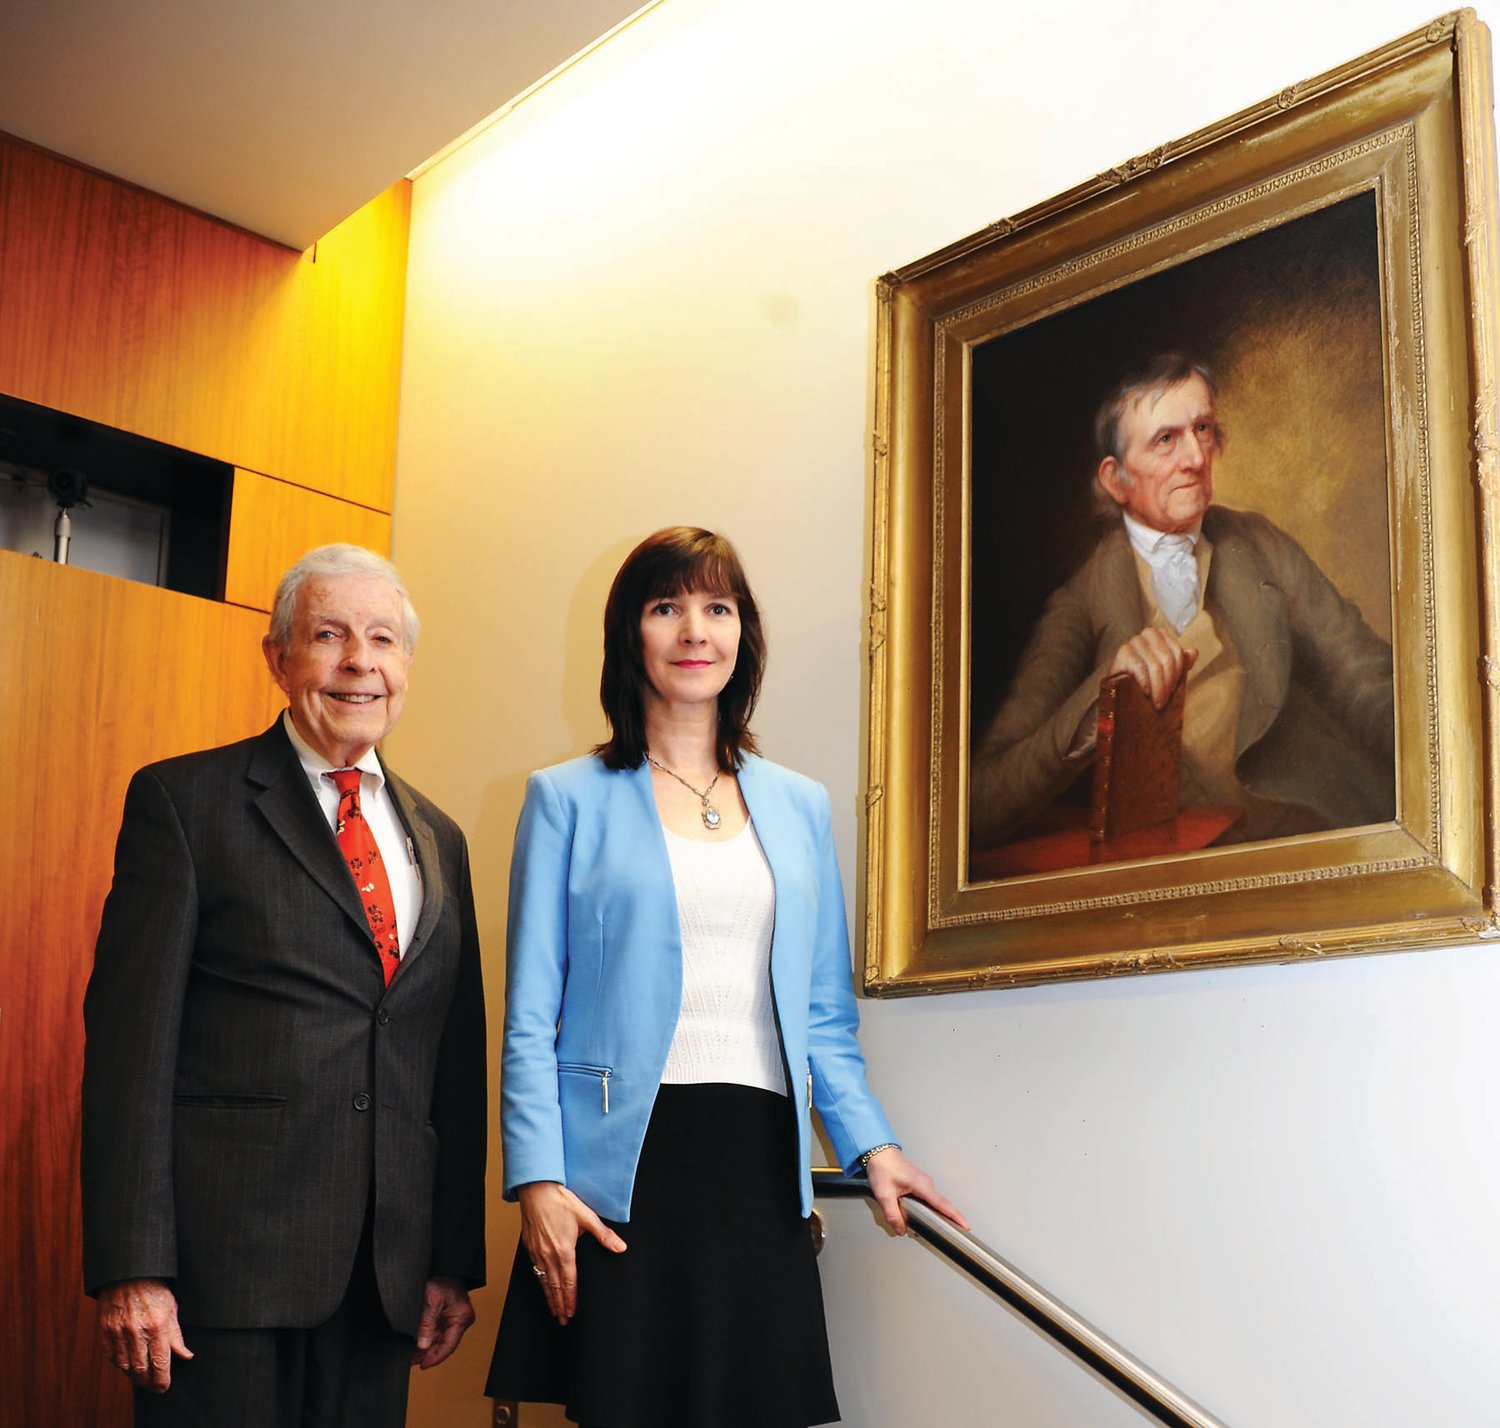 Frank Gallagher and Grace Deon stand next to Judge Henry Wynkoop’s portrait